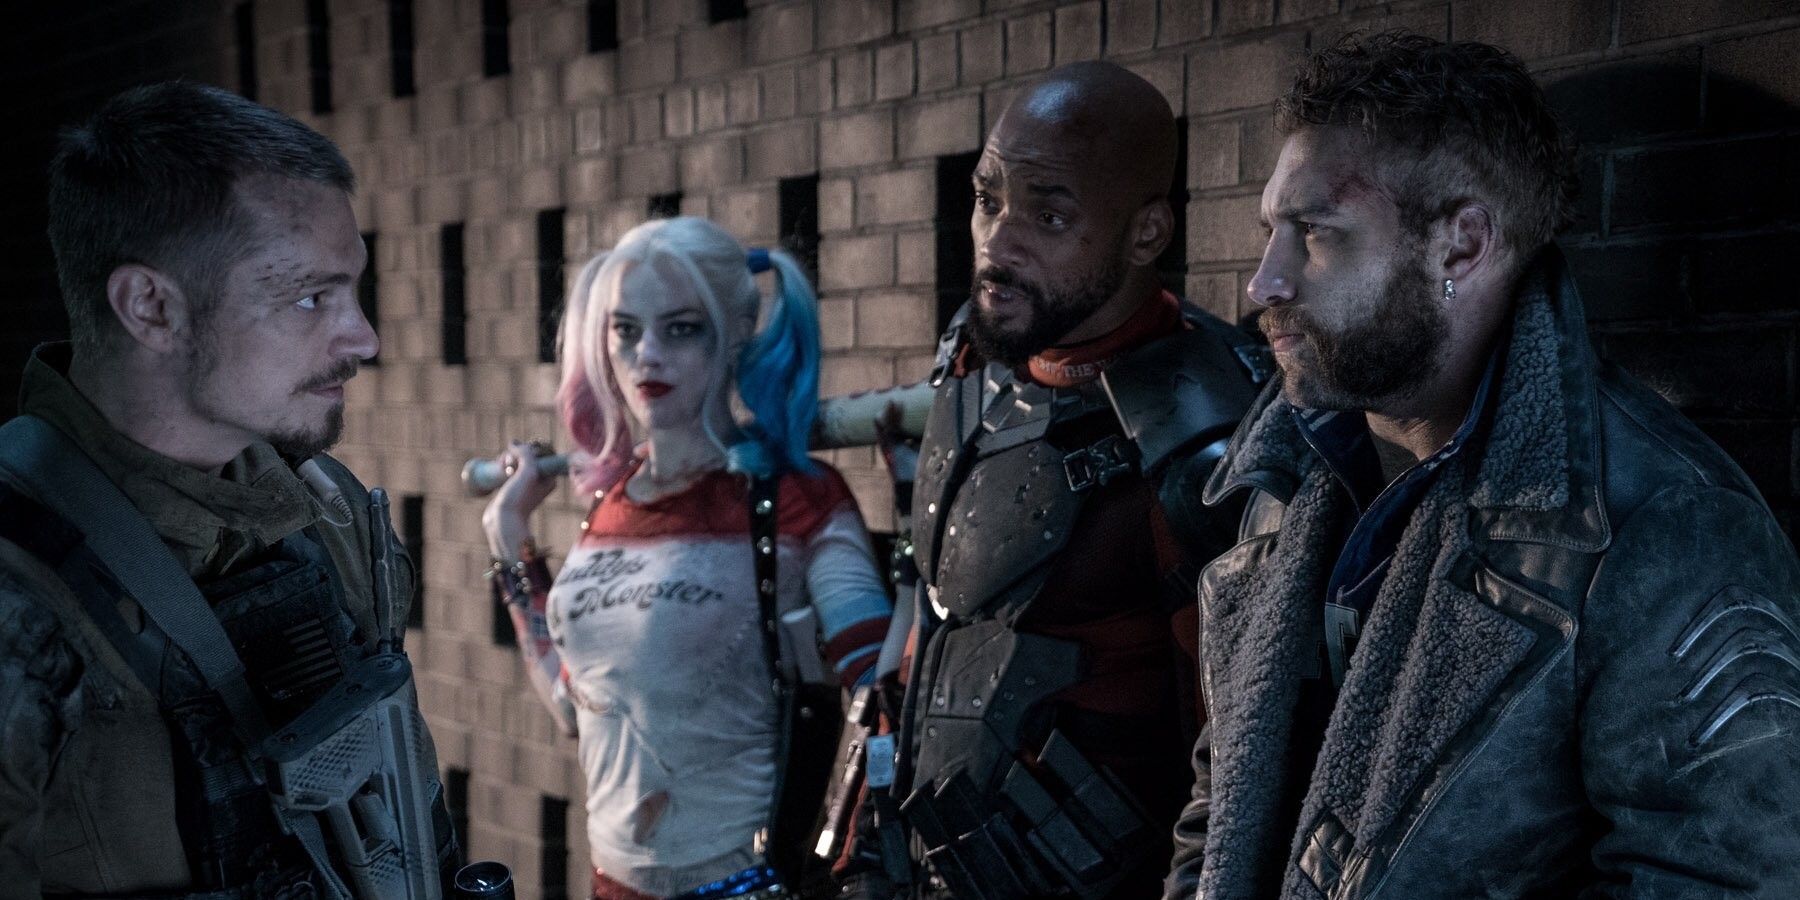 8 Unpopular Opinions About The Suicide Squad, According To Reddit